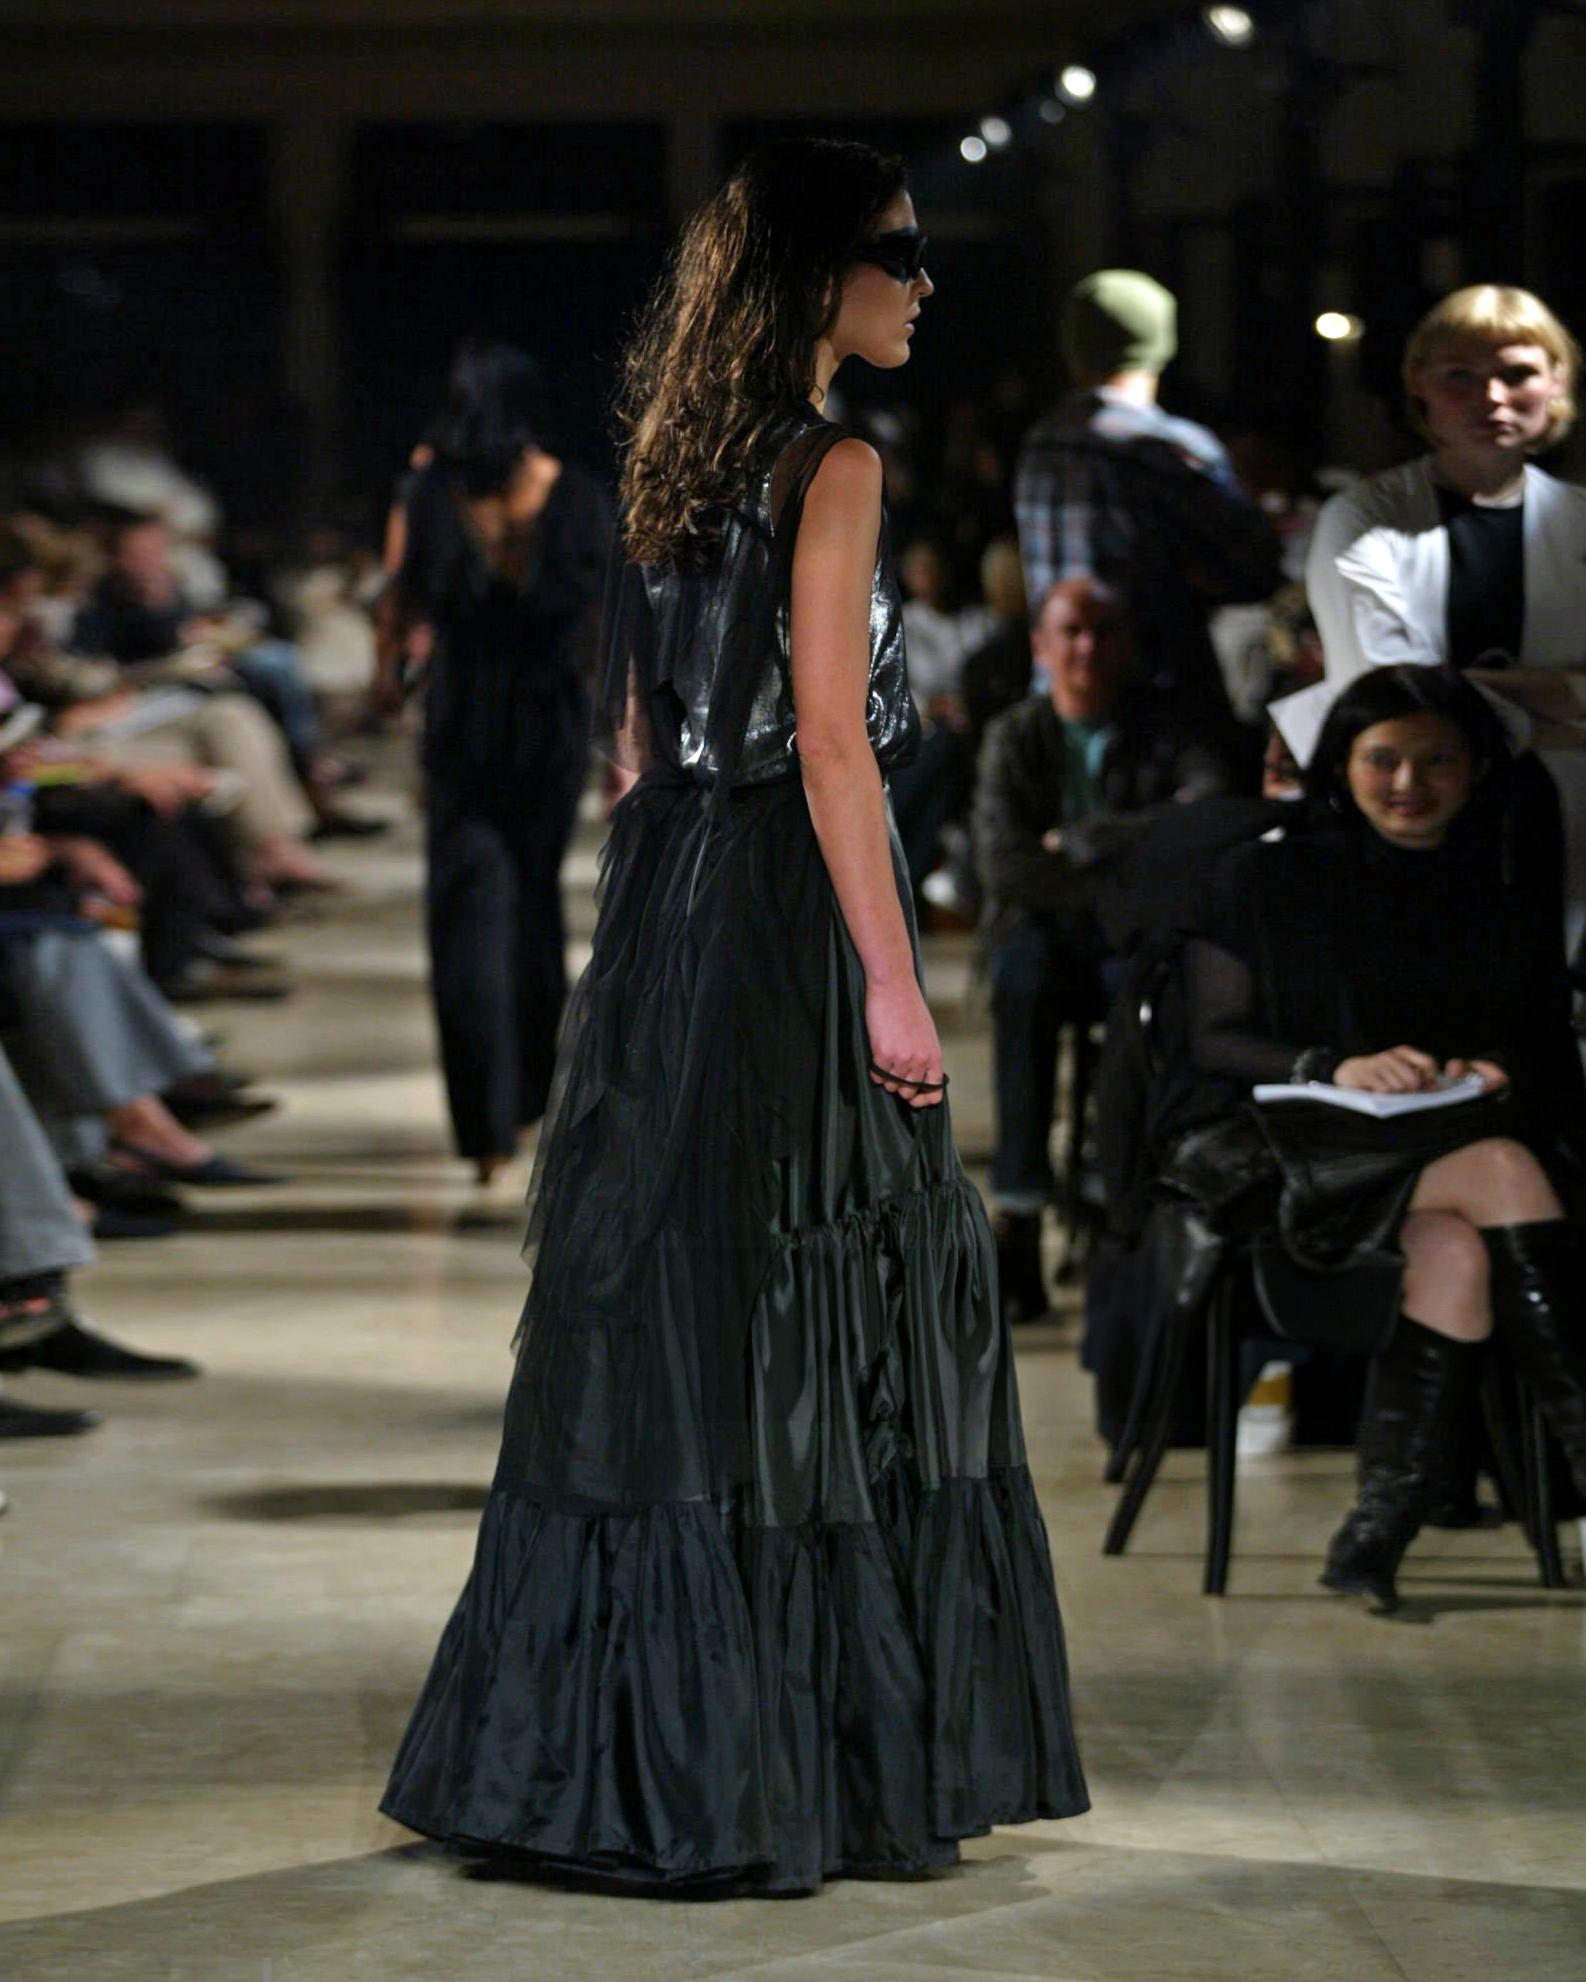 Martin Margiela Artisanal Evening Dress Made Out Of Vintage Petticoats, ss 2003 For Sale 5